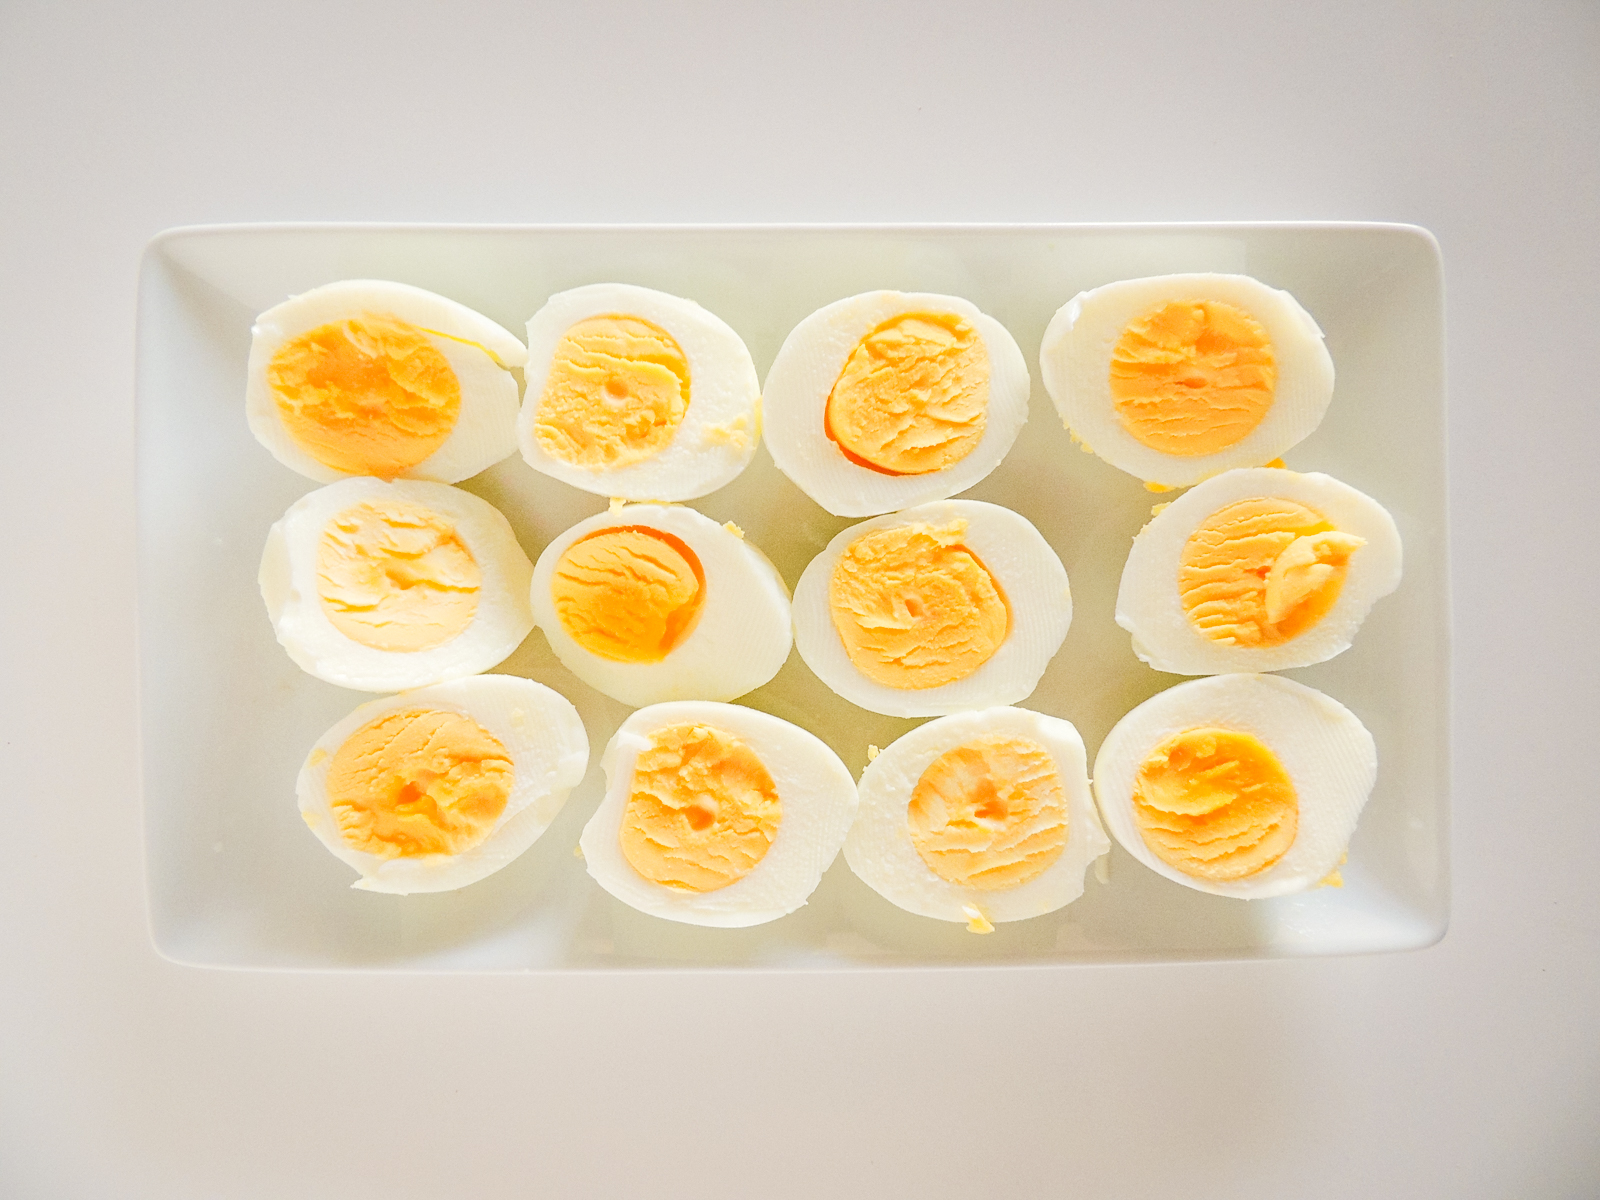 A tray with hard boiled eggs cut in half.